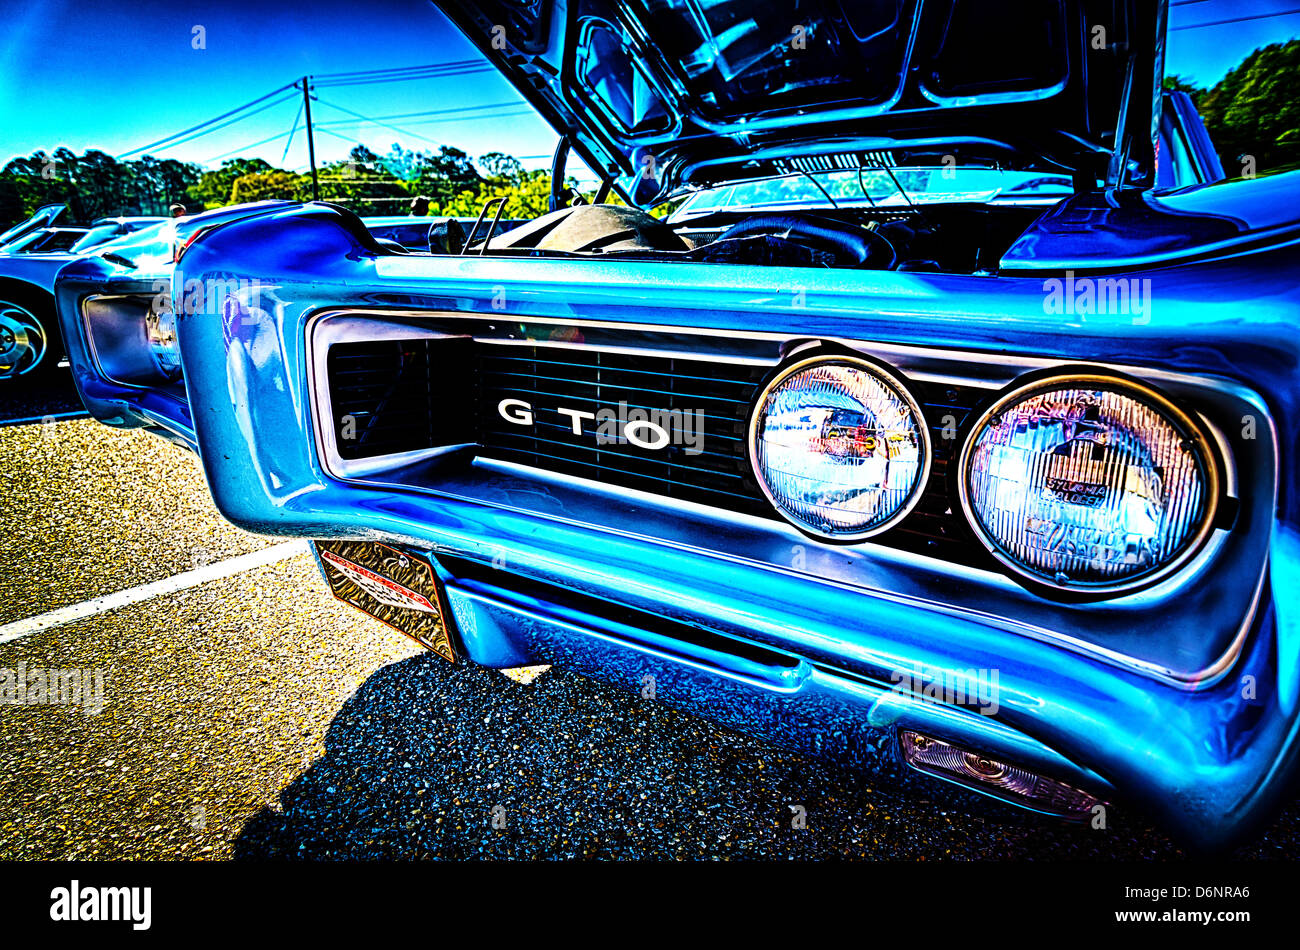 Closeup of front of vintage blue Pontiac GTO muscle car. Stock Photo